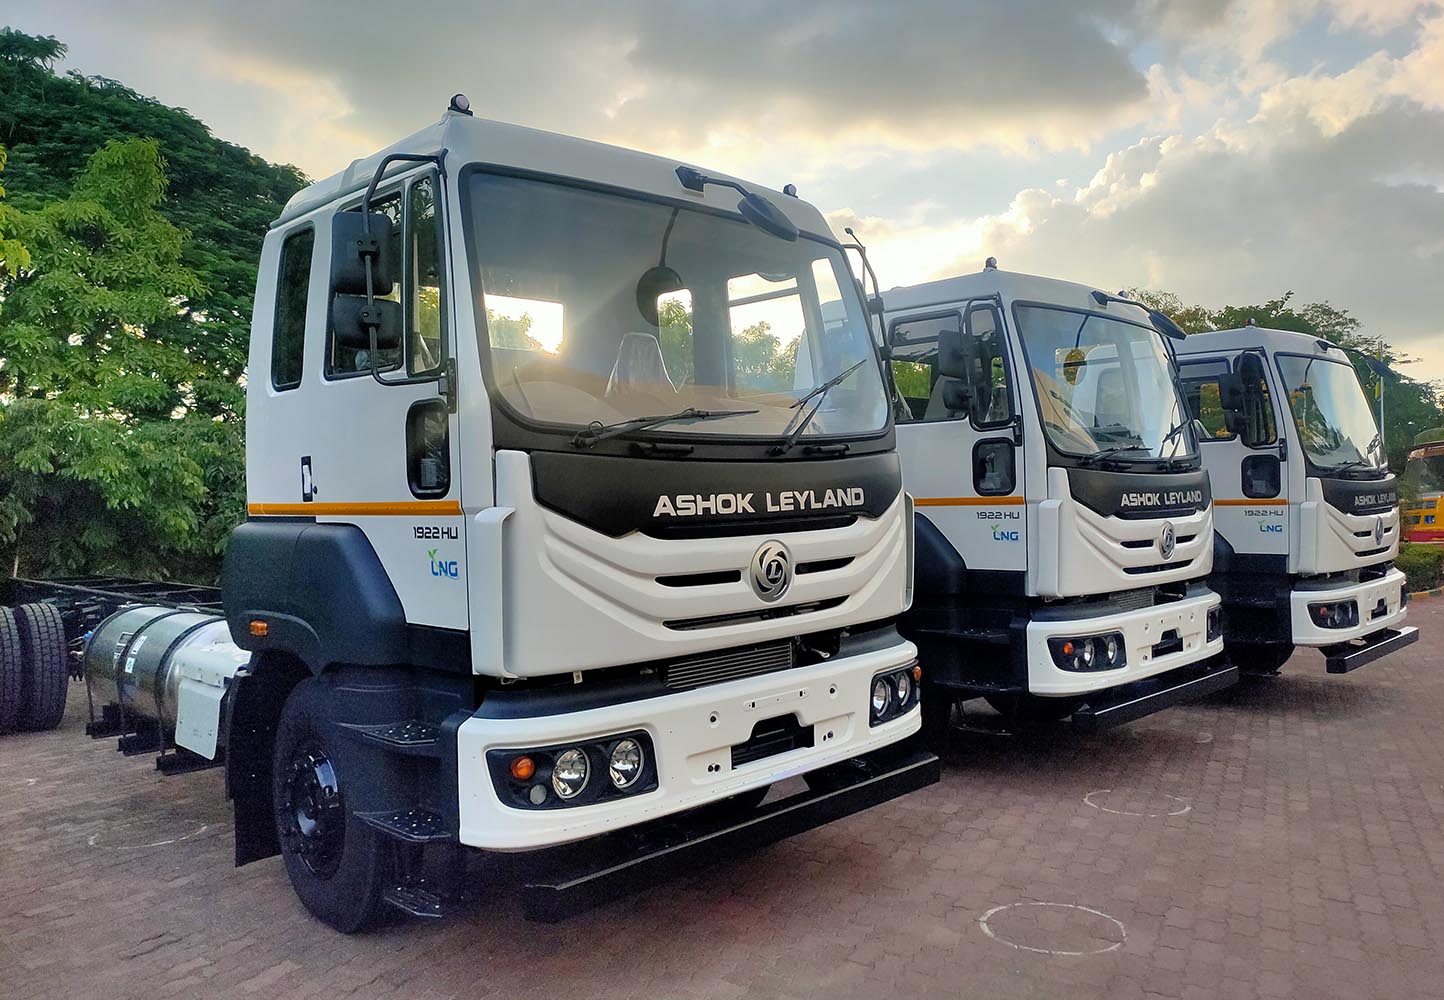 Ashok Leyland launches India's pioneer LNG truck